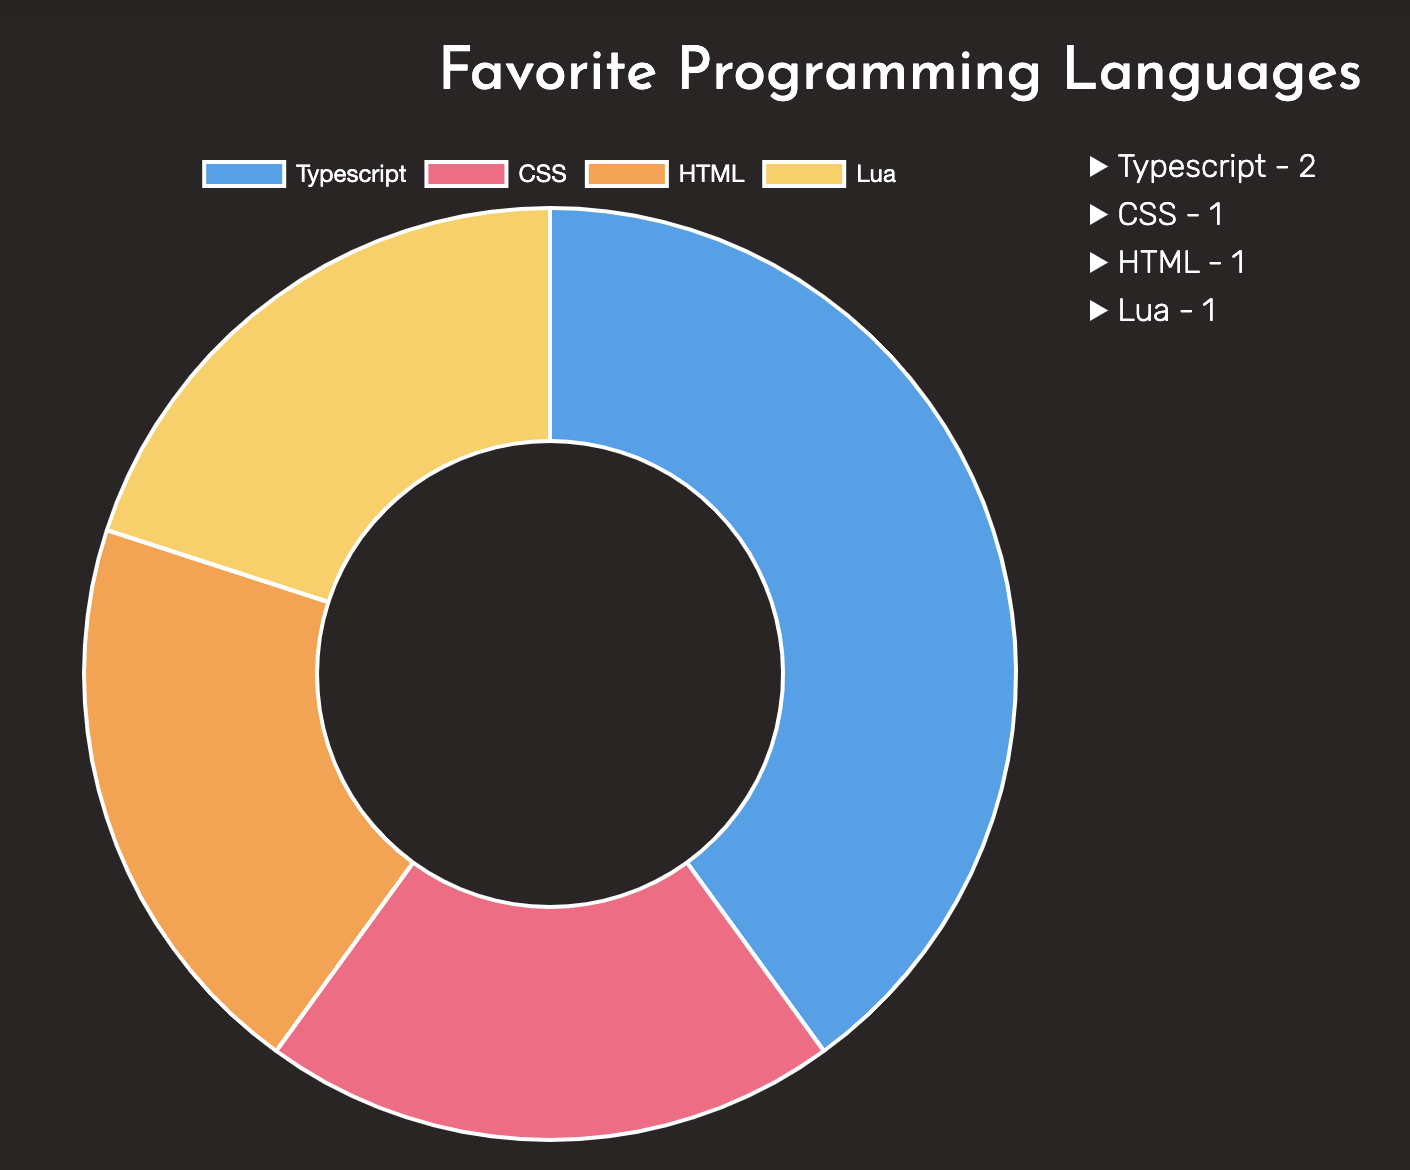 Pie chart of favorite programming languages. So far, Typescript has two votes, followed by one vote each to Lua, CSS, and HTML.